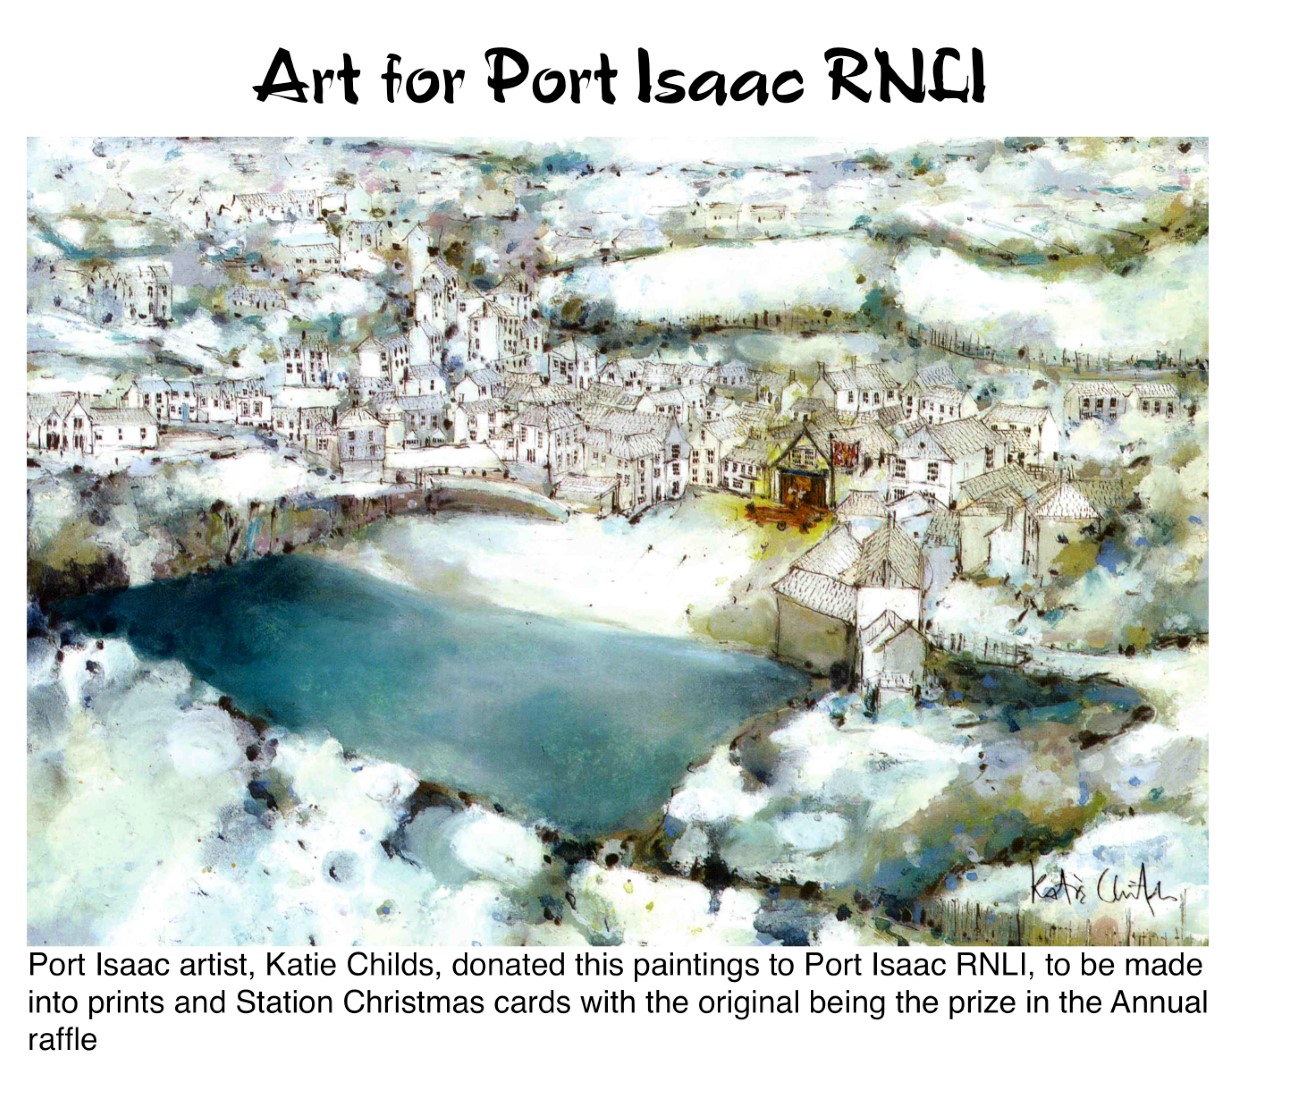 Art for Port Isaac RNLI - Kate Childs